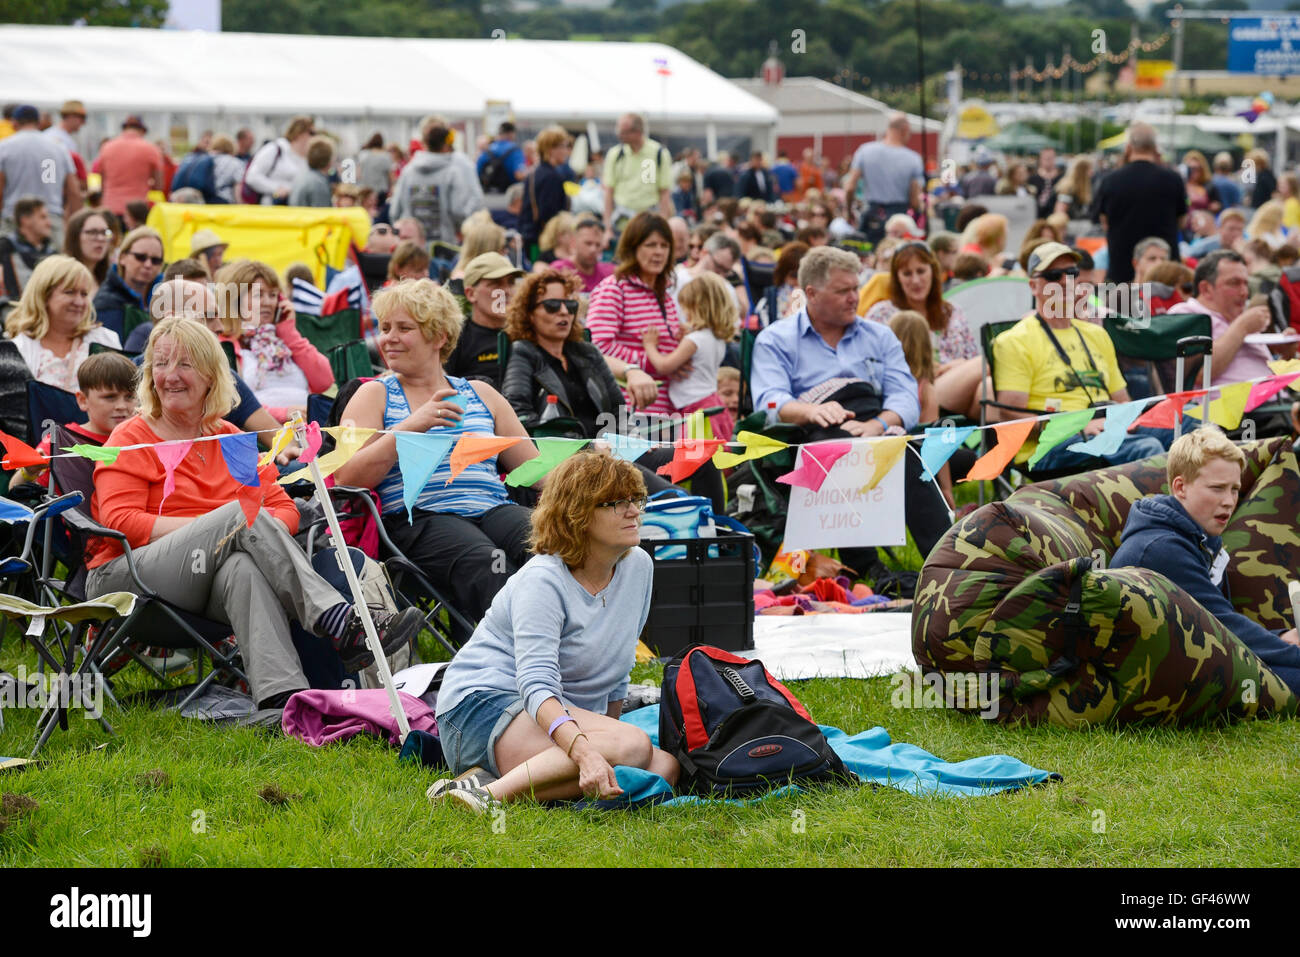 Bolesworth, Cheshire, UK. 29th July 2016. Fans waiting for Texas to come to the Main stage. The event is the brainchild of Chris Evans and features 3 days of cars, music and entertainment with profits being donated to the charity Children in Need. Credit:  Andrew Paterson/Alamy Live News Stock Photo